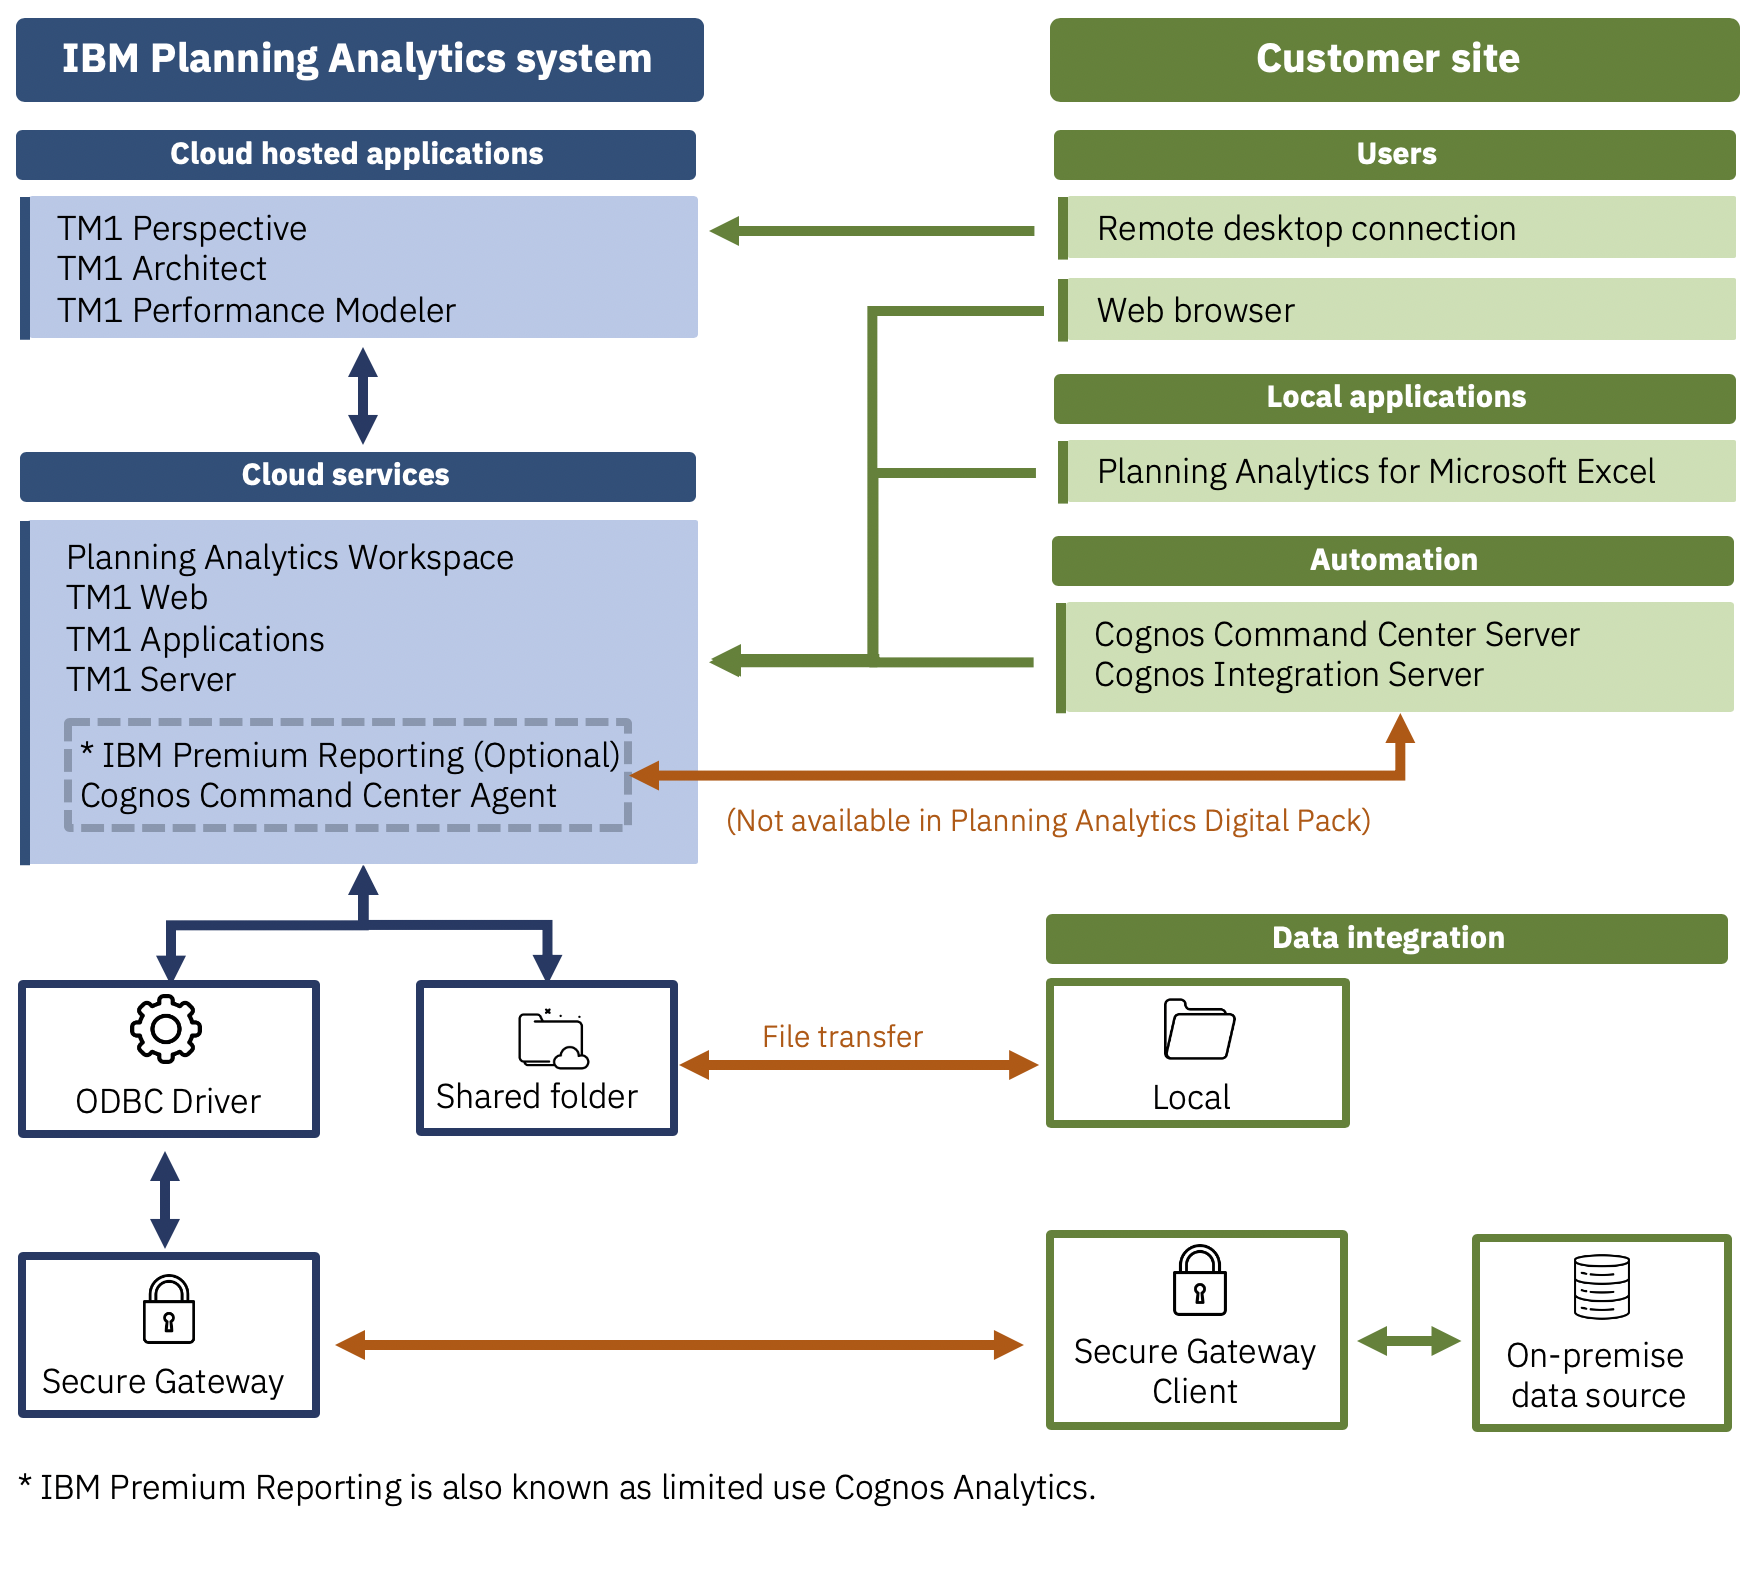 Planning Analytics system overview and components